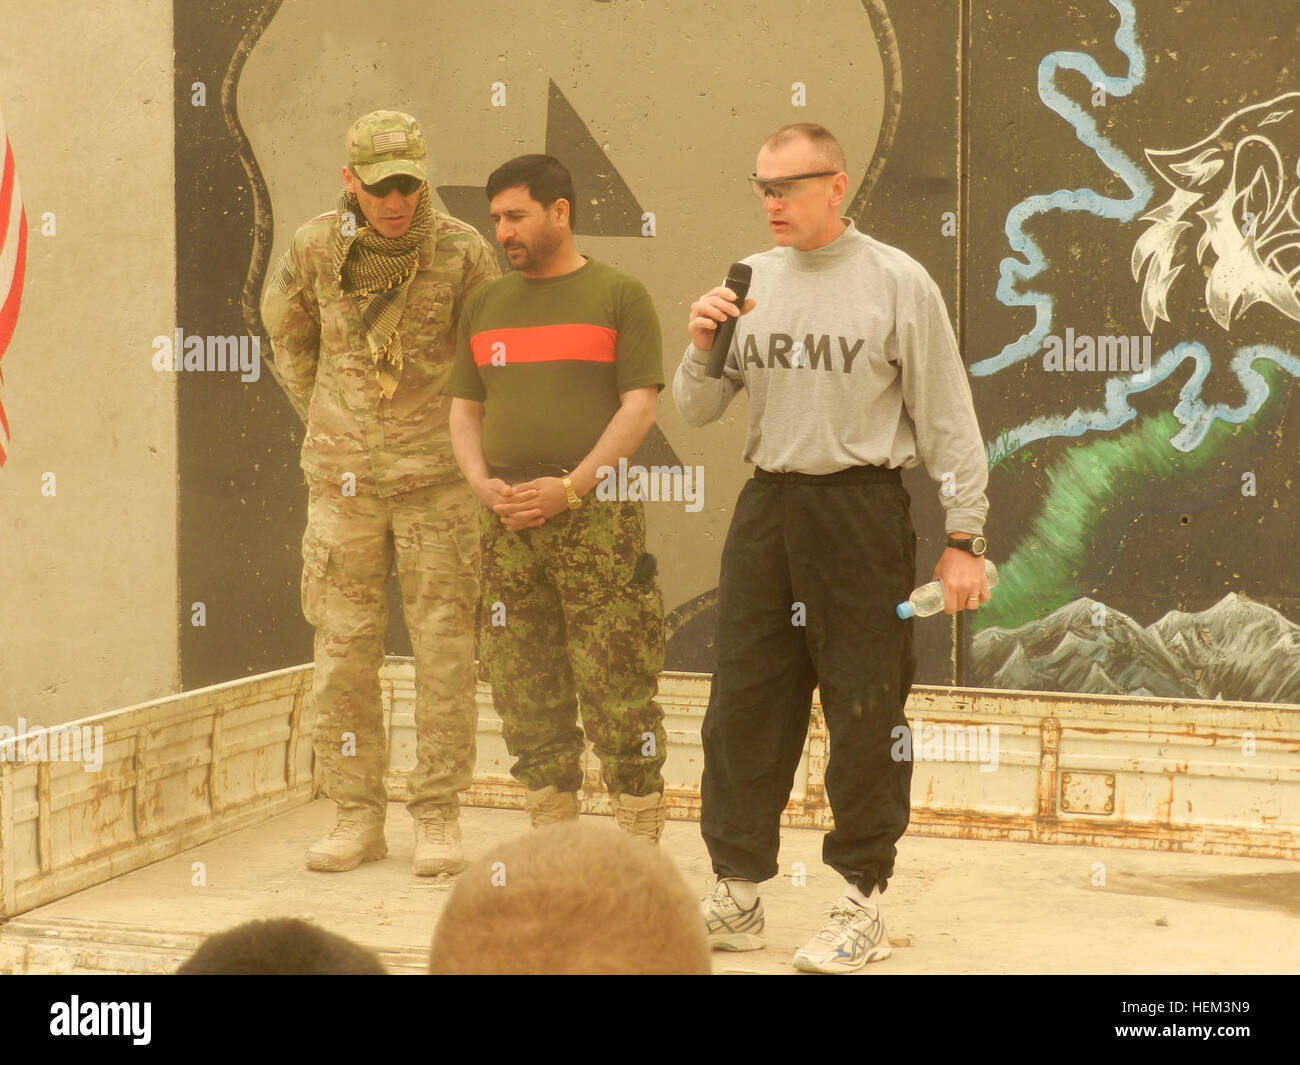 Col. Todd Wood, commander of Task Force Arctic Wolves, and Afghan Brig. Gen. Amad Habibi, commander of the 1st Brigade, 205th Afghan National Army Corps, address the crowd of soldiers preparing for a St. Patty's Day 5k run at Forward Operating Base Masum Ghar in Panjwa'i district of southern Kandahar province, Afghanistan, March 19, 2012. Partnership Patty's Day Run 120319-A-AX328-002 Stock Photo